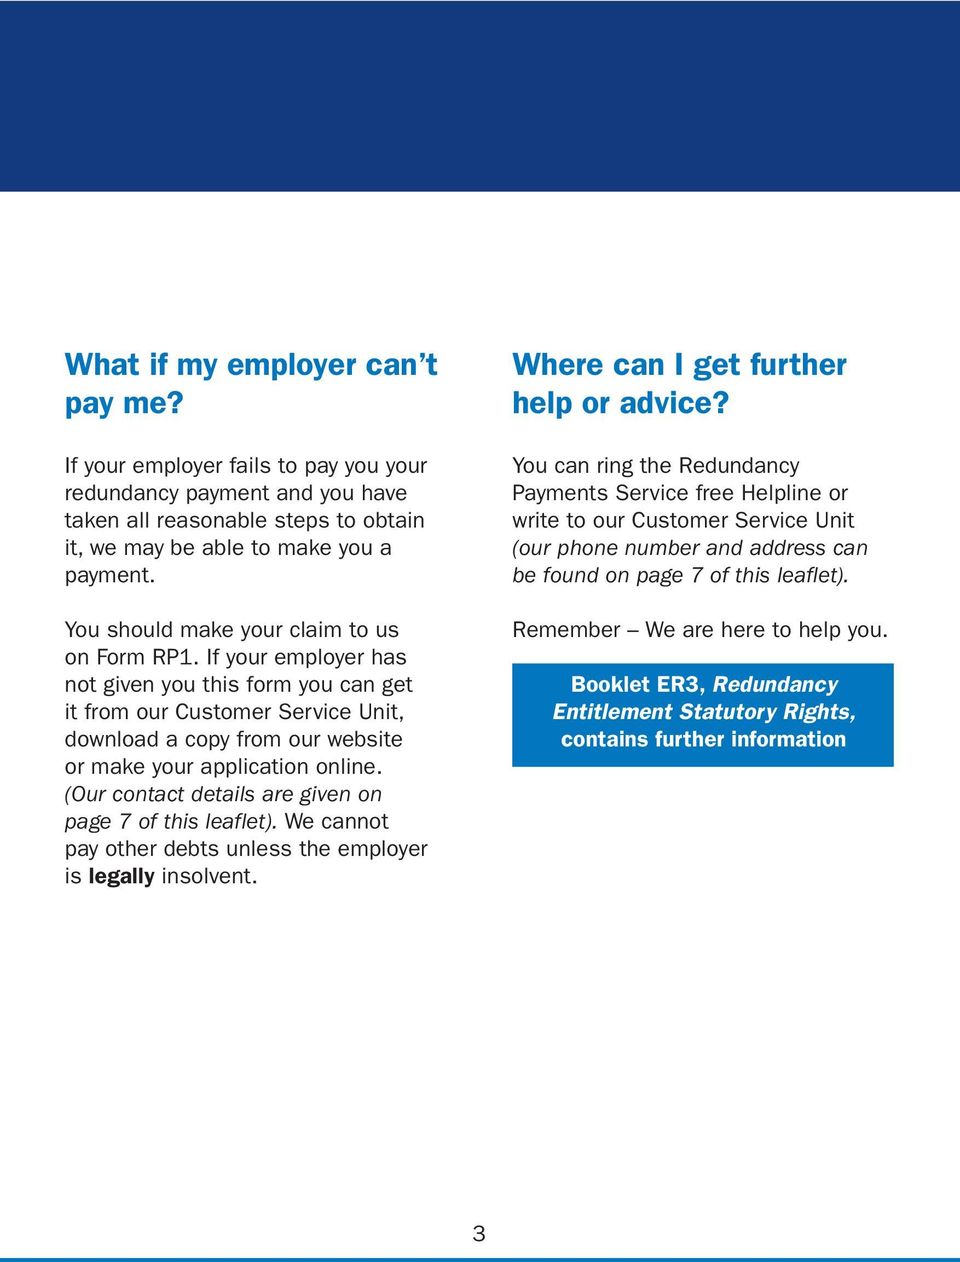 If your employer has not given you this form you can get it from our Customer Service Unit, download a copy from our website or make your application online.